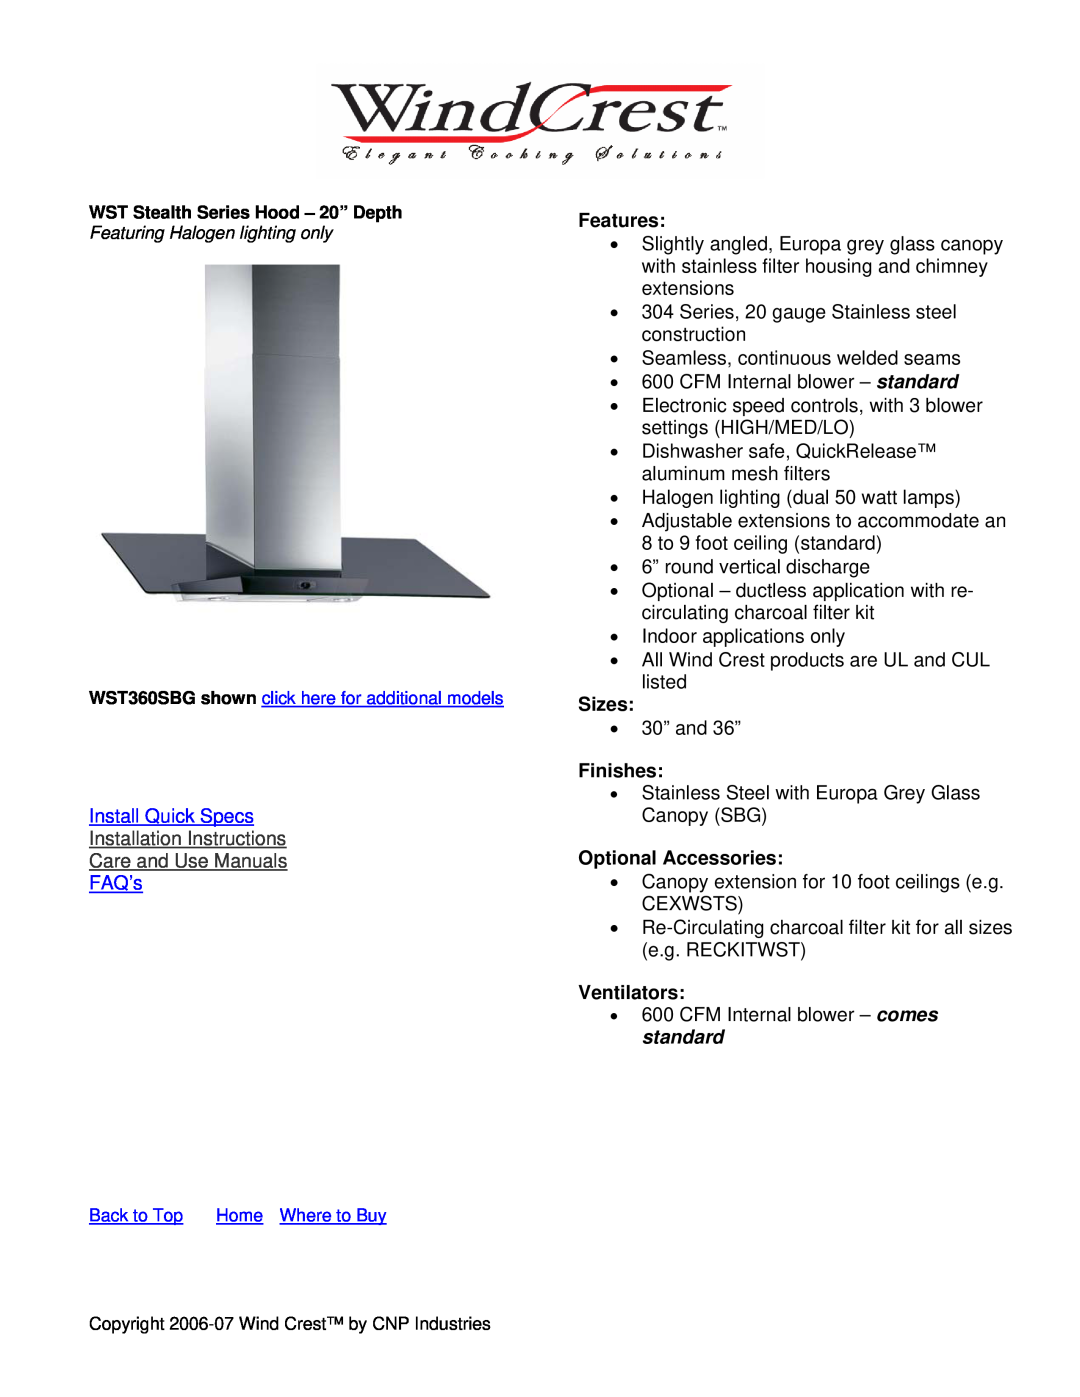 Wind Crest WST360SBG installation instructions Install Quick Specs, Installation Instructions Care and Use Manuals, FAQ’s 